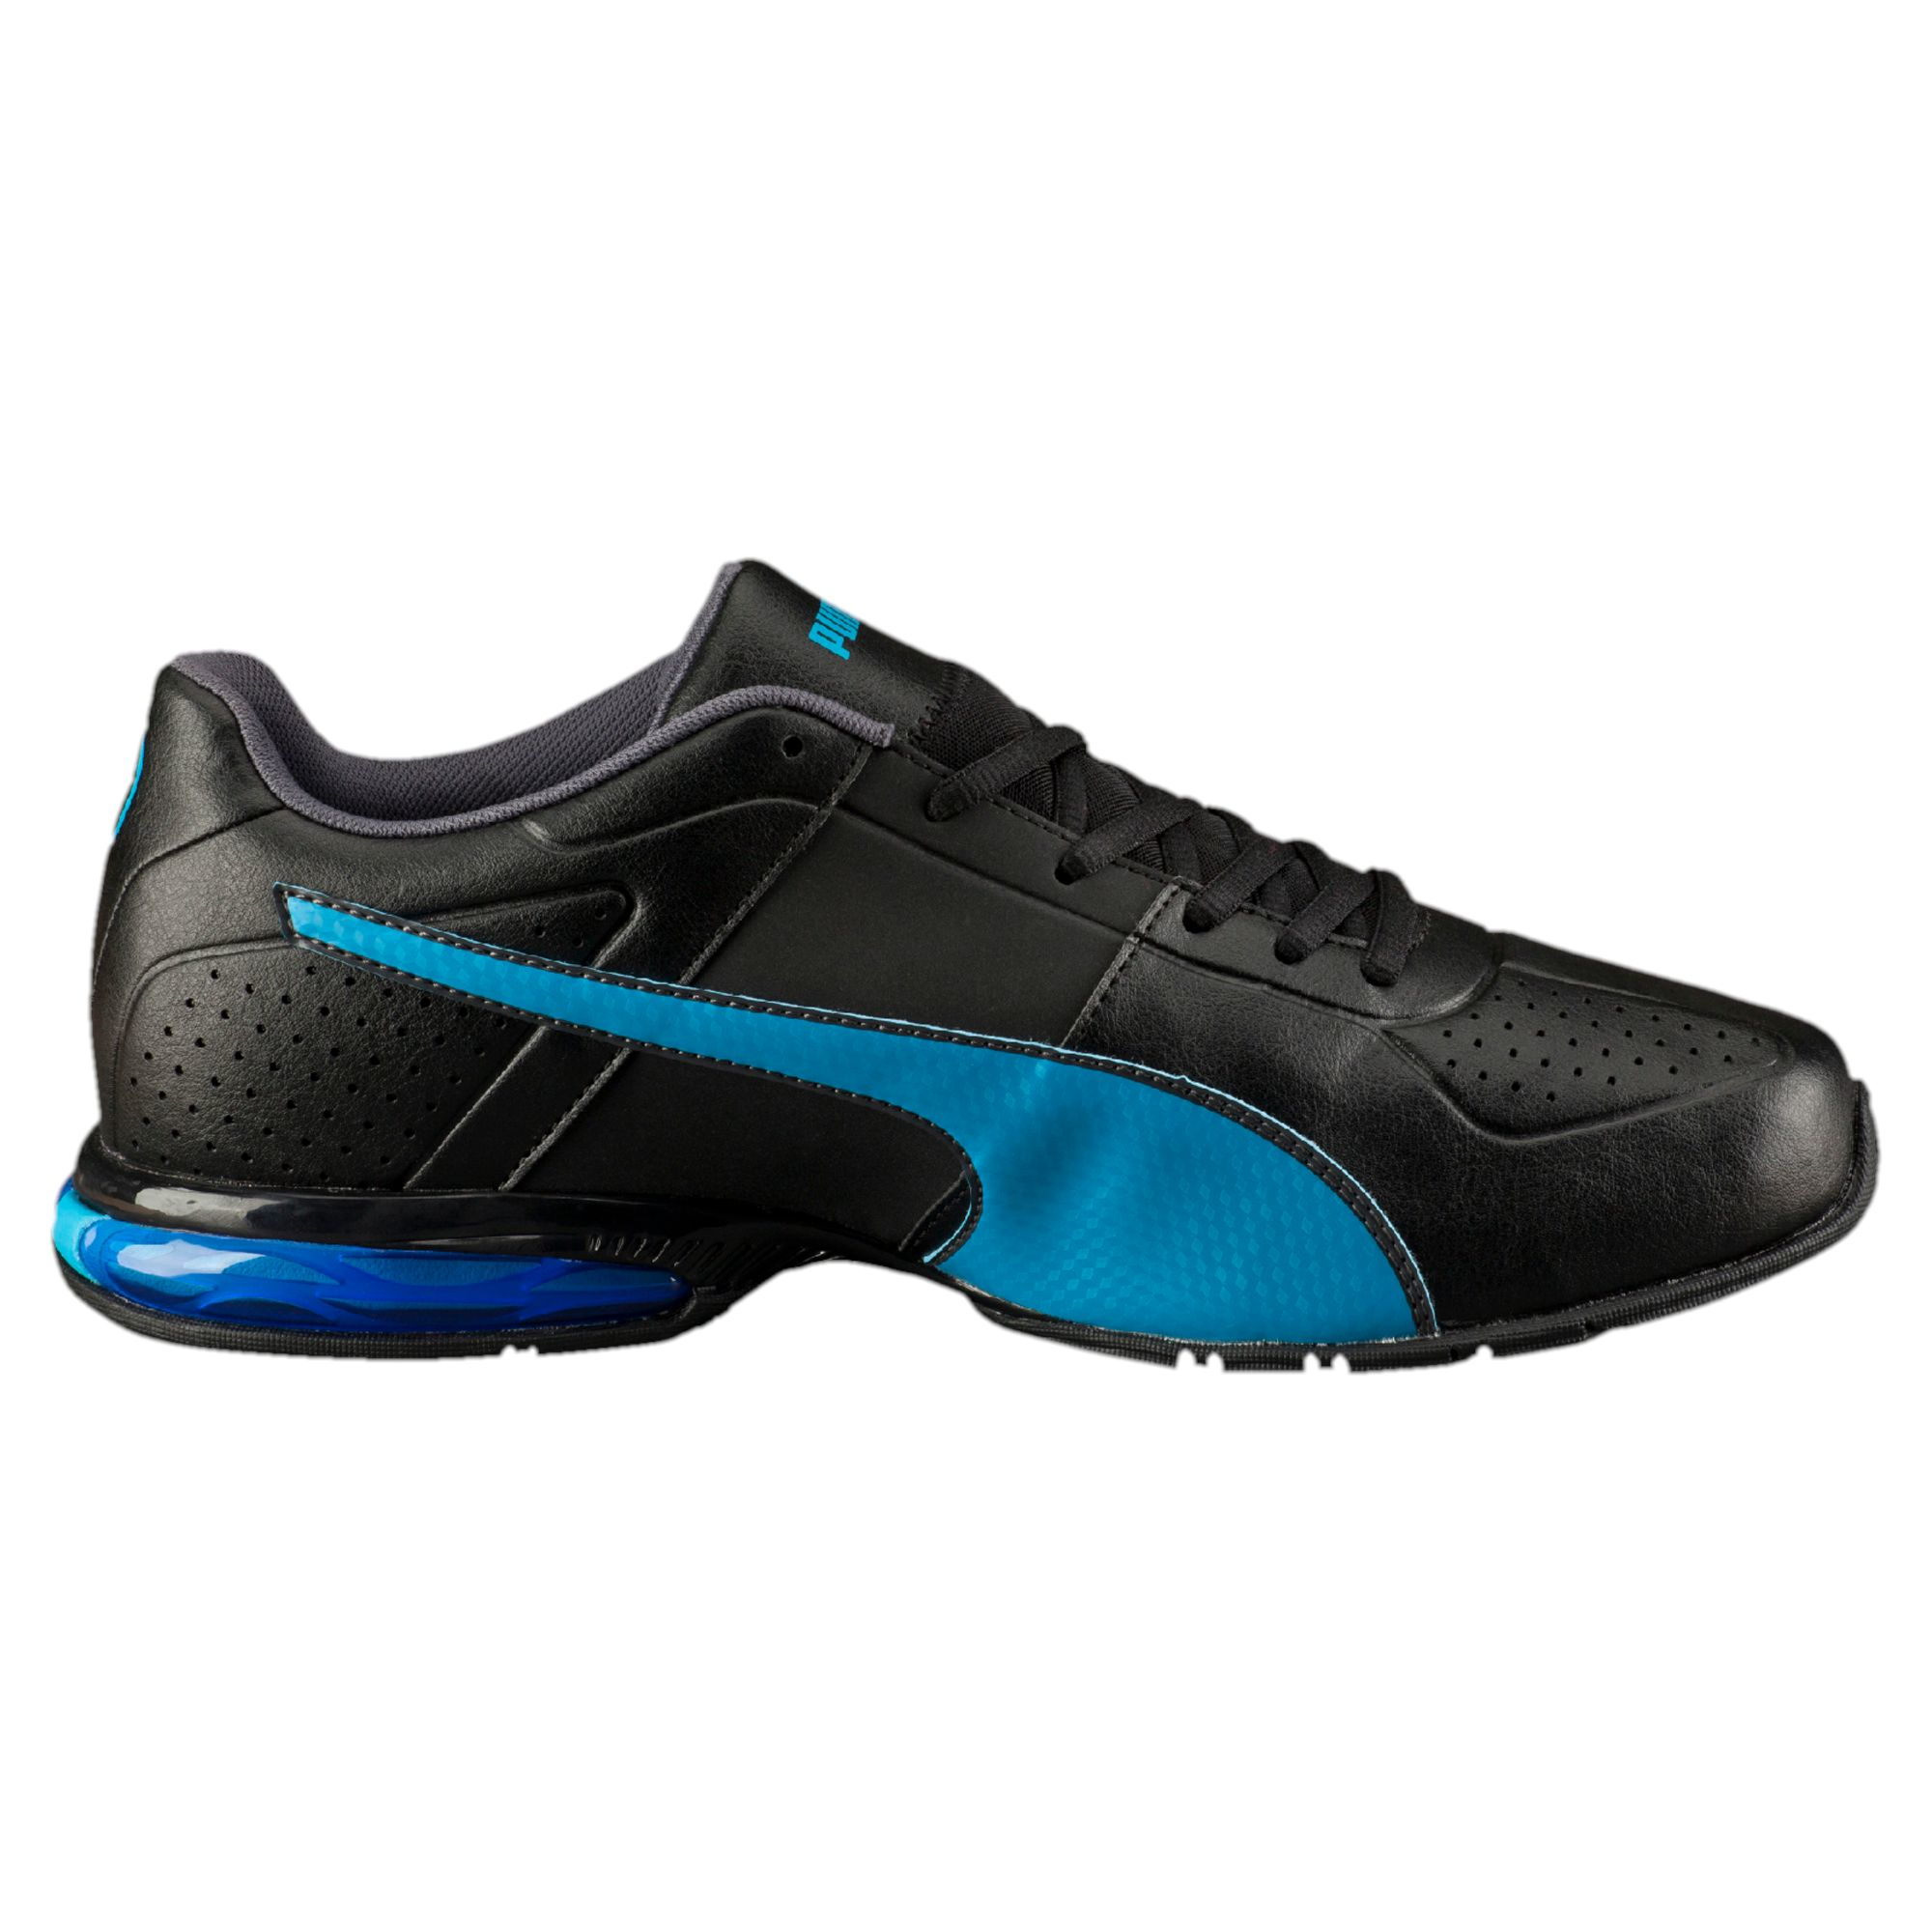 Lyst - Puma Cell Surin 2 Men's Training Shoes in Blue for Men